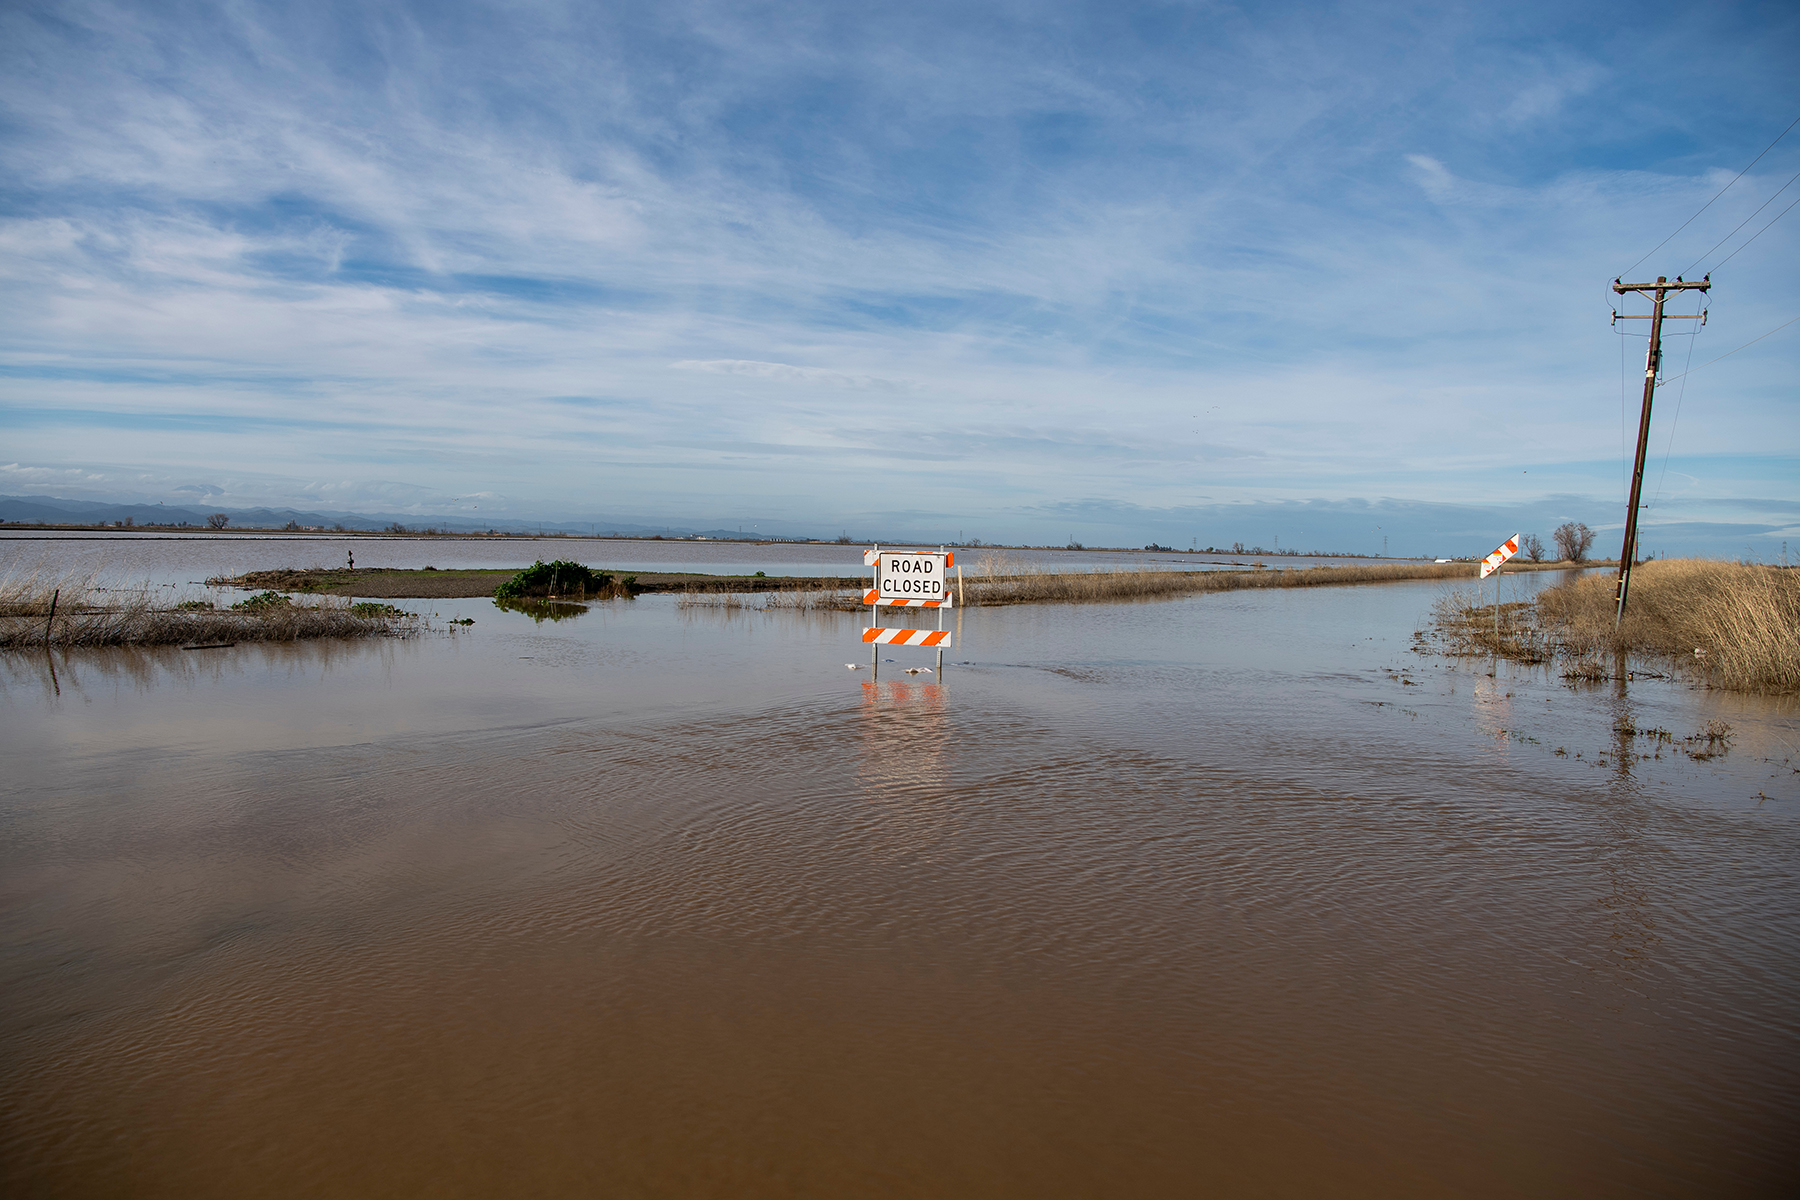 Floodwaters forced the closure of San Jose Road at the intersection of State Highway 20 near Williams, in Colusa County, California. (Image courtesy of Kenneth James/California Department of Water Resources)